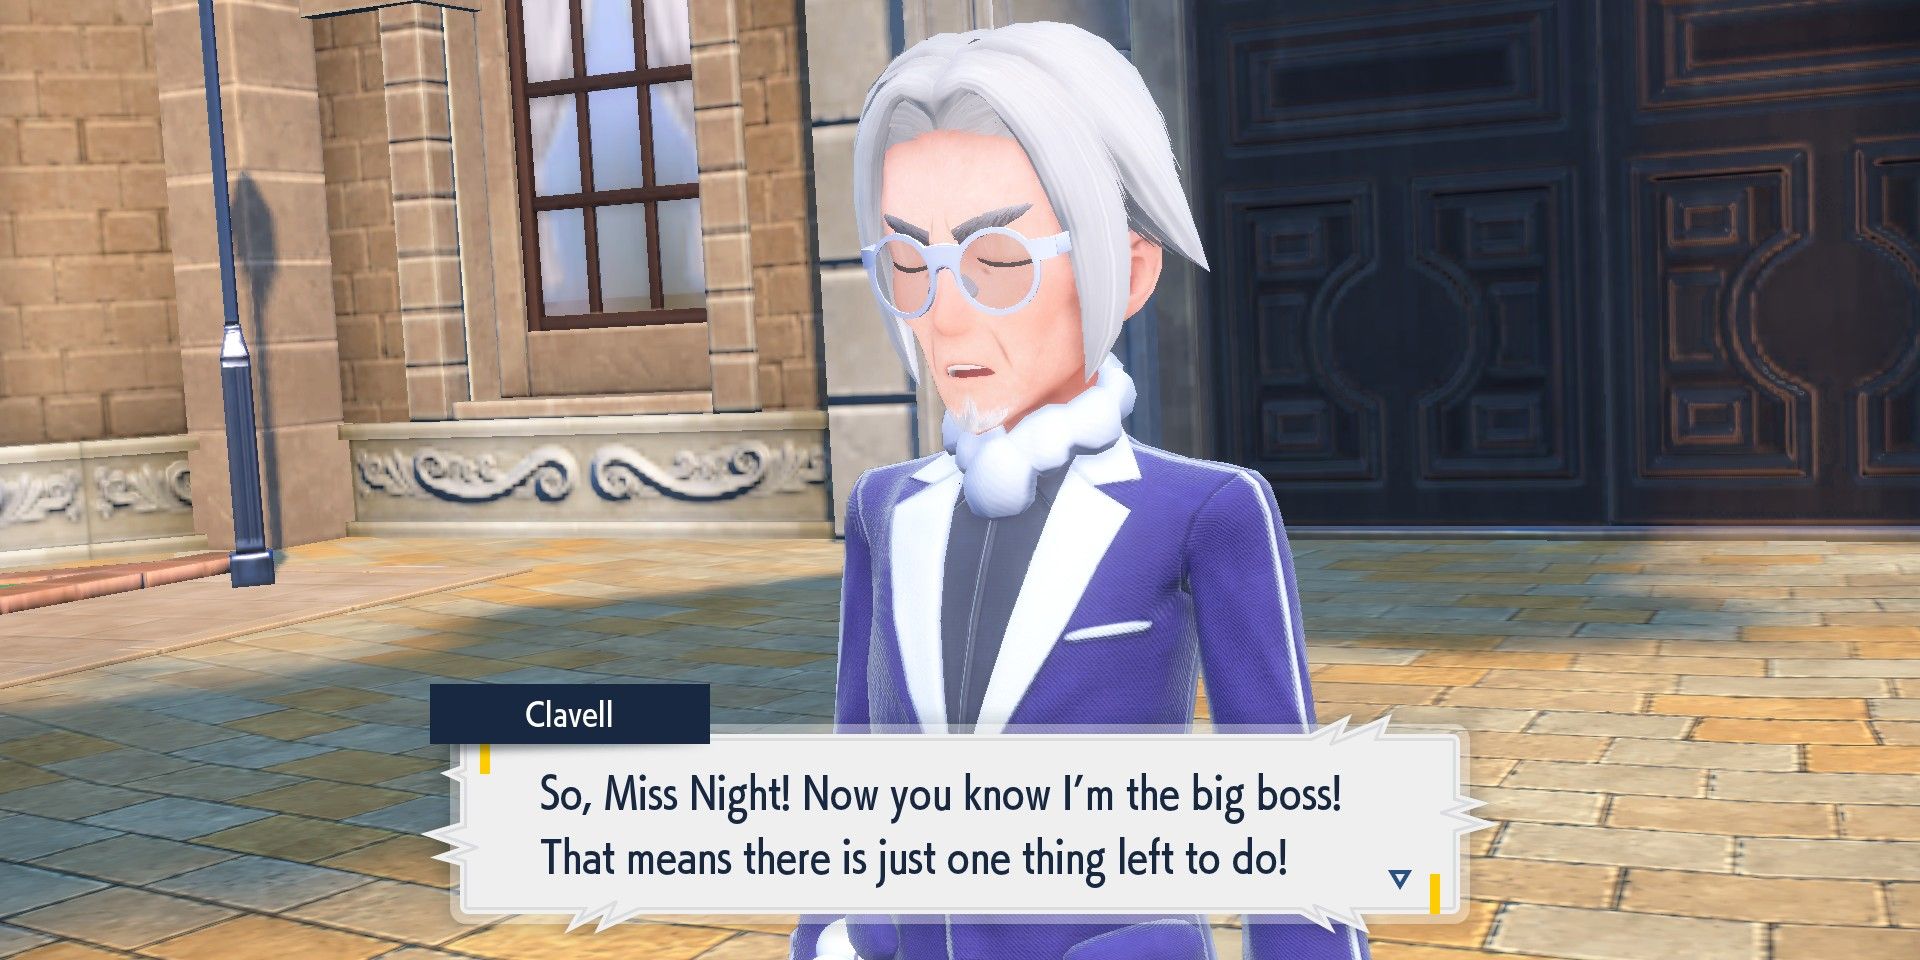 Director Clavell Revealing himself to be the big boss in Pokemon Scarlet & Violet